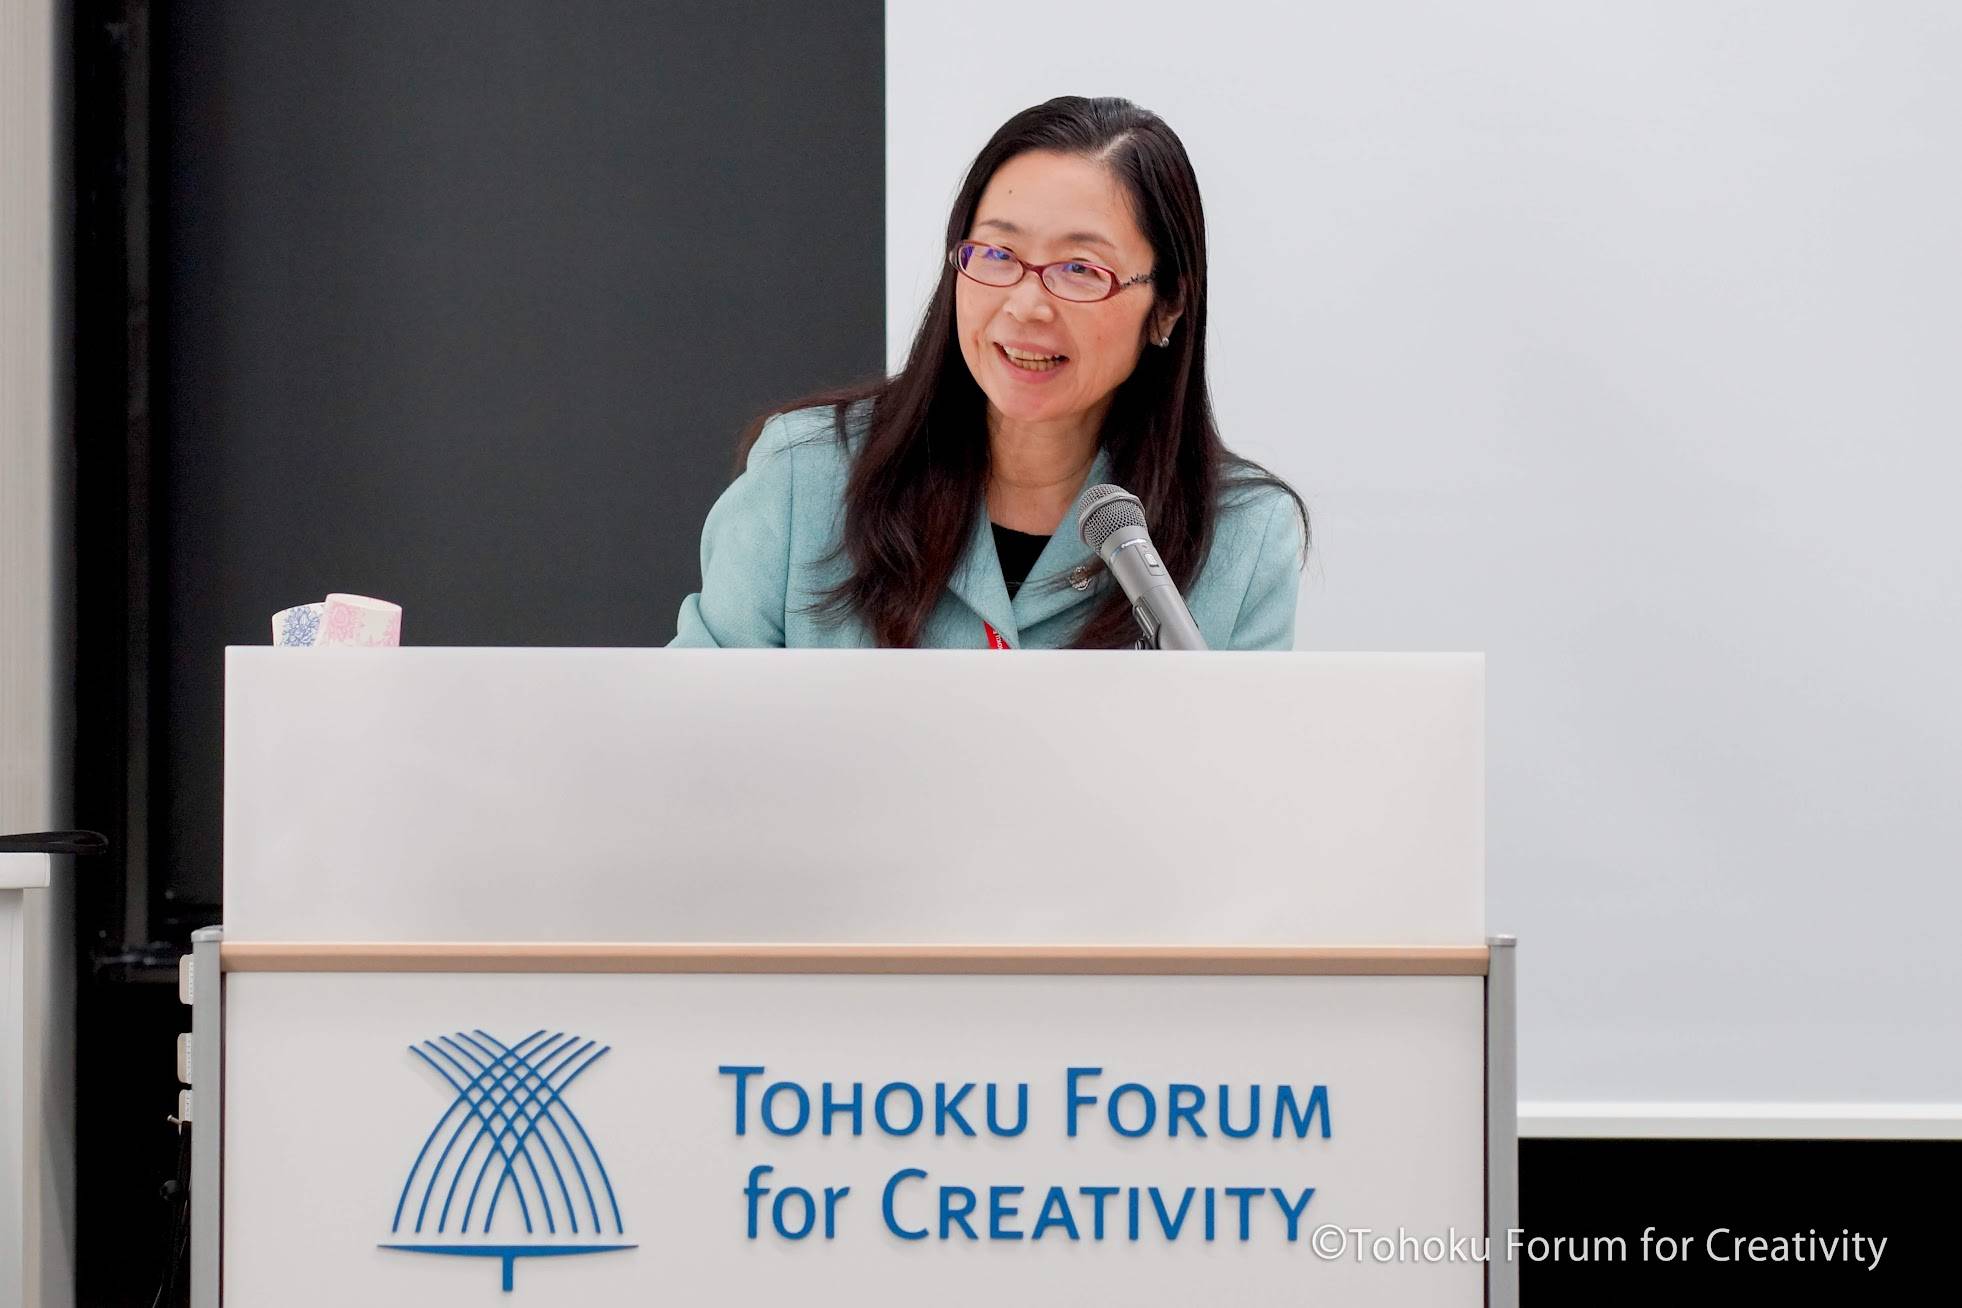 Noriko Osumi delivers the opening remarks at a 2018 science course promotion event for high school girls hosted by the Tohoku Forum for Creativity. Osumi has been instrumental in ensuring girls receive more exposure to role models in the fields of science. | TOHOKU FORUM FOR CREATIVITY